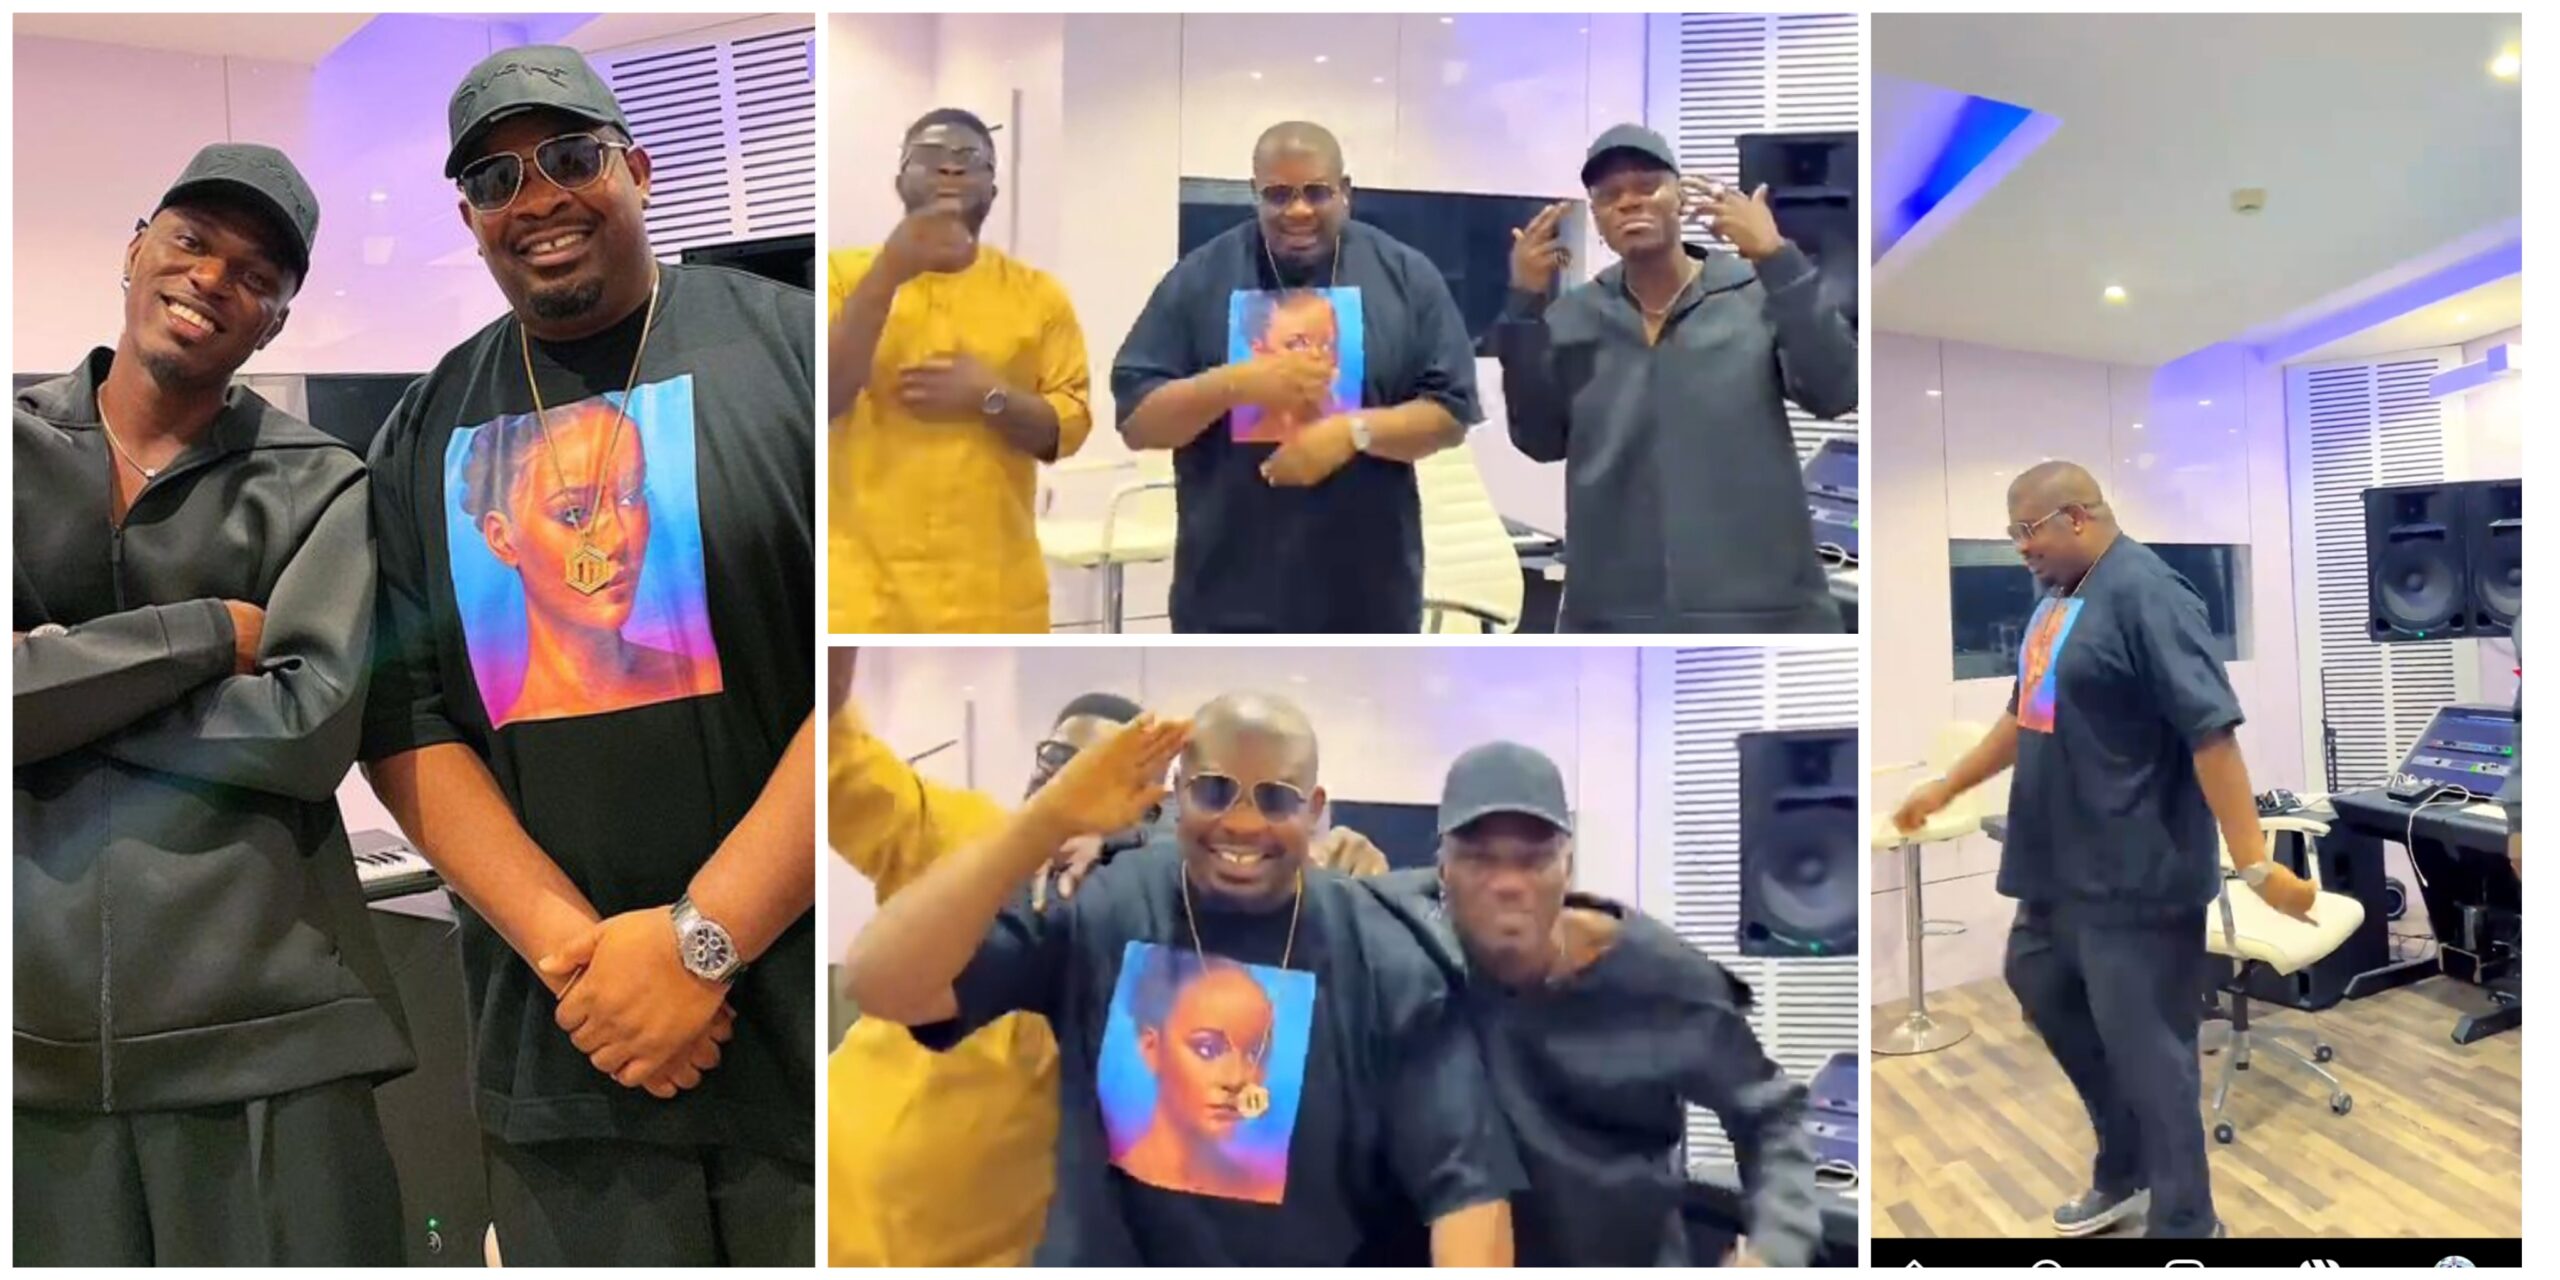 “Meeting Don Jazzy is a dream come true” – Spyro elated as he grooves with Mavin Boss and Craze Clown